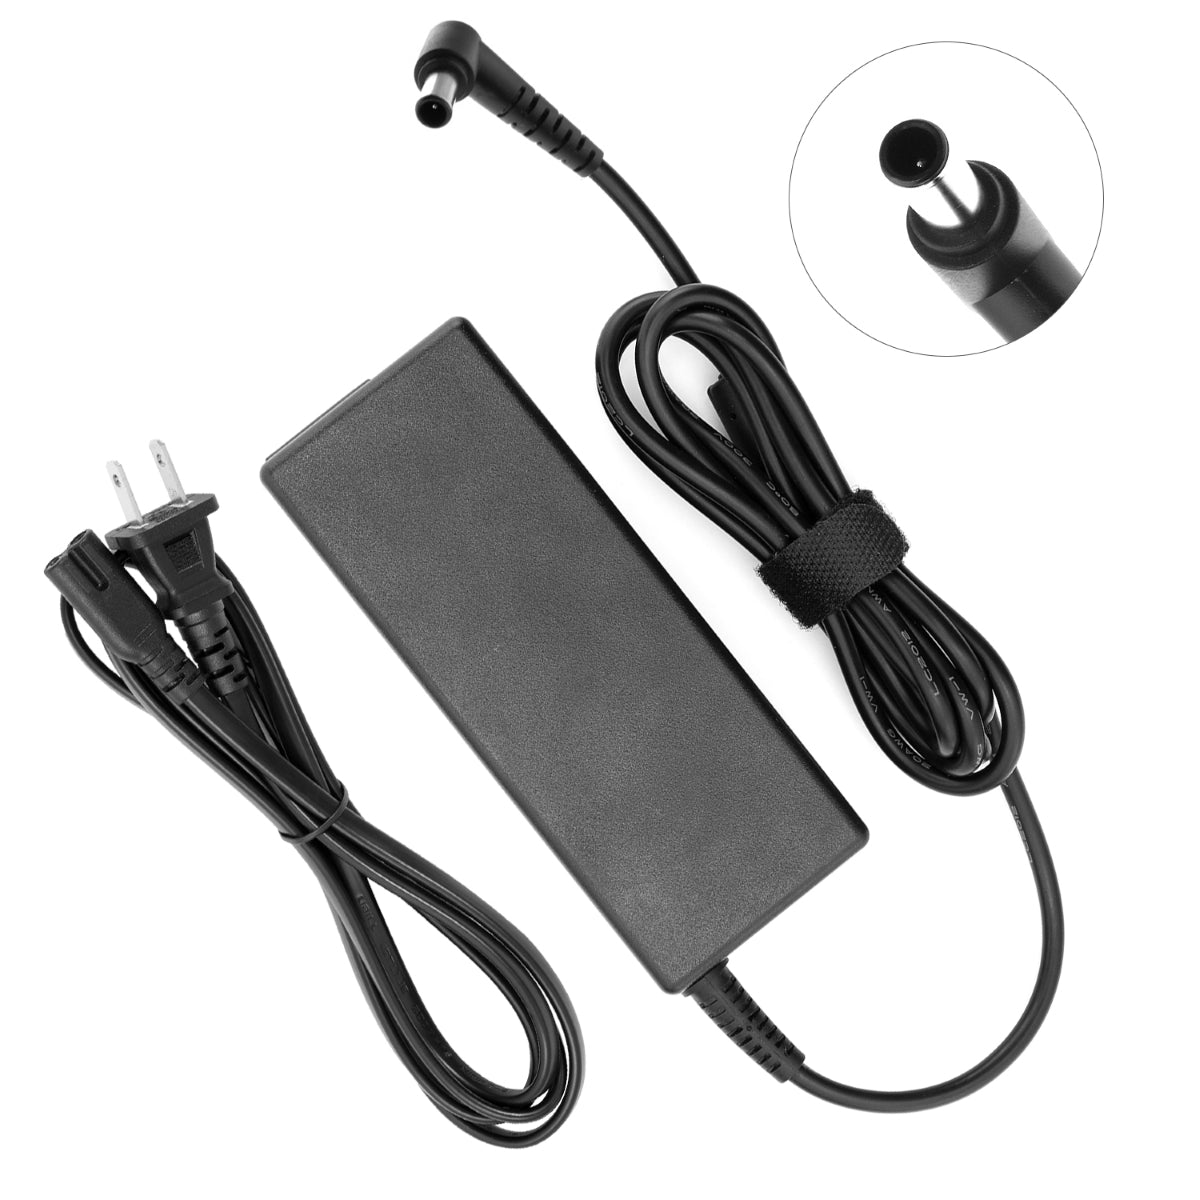 AC Adapter Power Supply for Samsung SYNCM170T Monitor